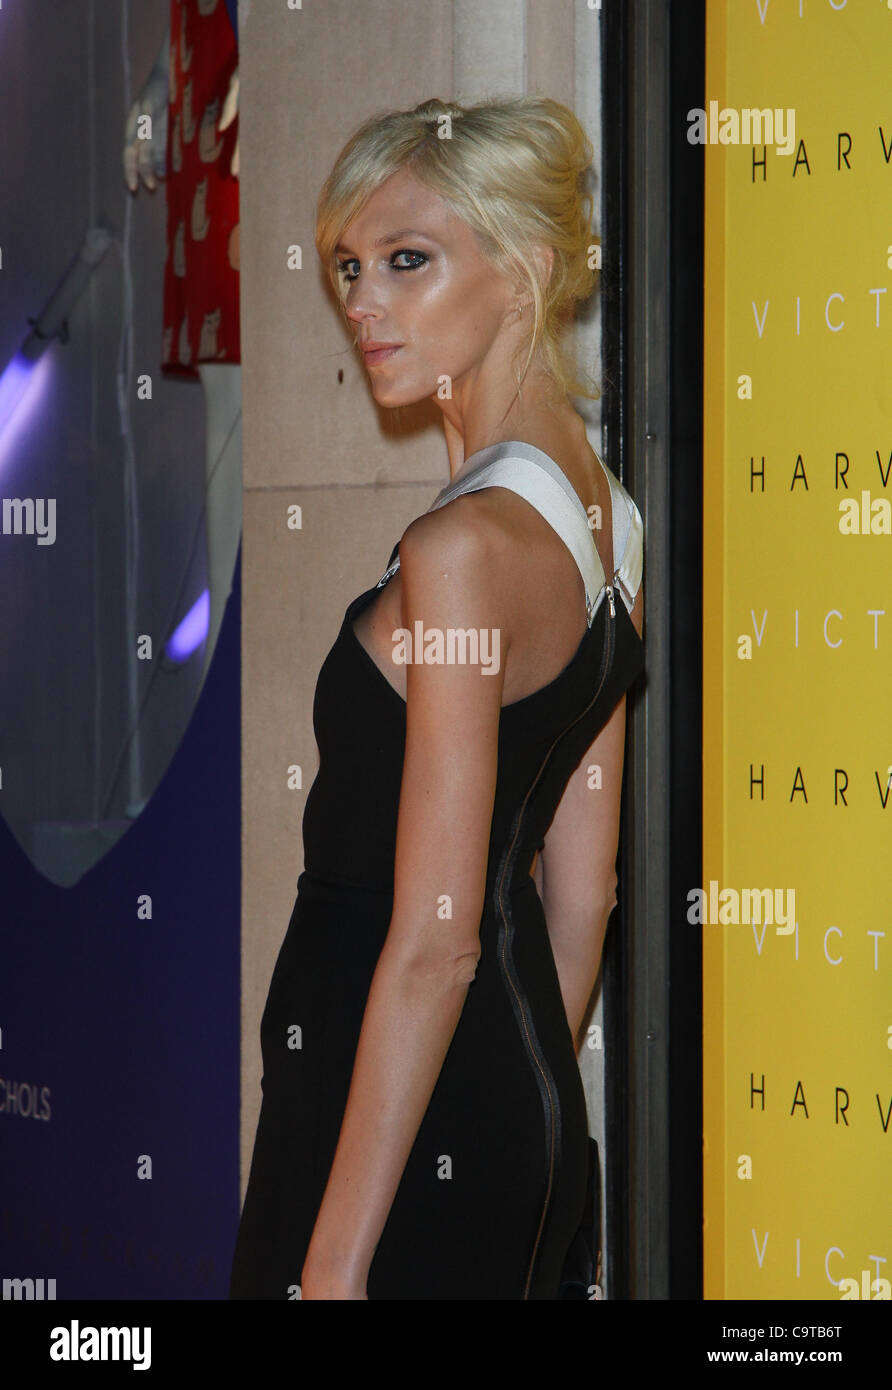 London, UK, 17/02/2012 Anja Rubik attends the Victoria Beckham - photocall at the luxury department store Harvey Nichols to cele Stock Photo